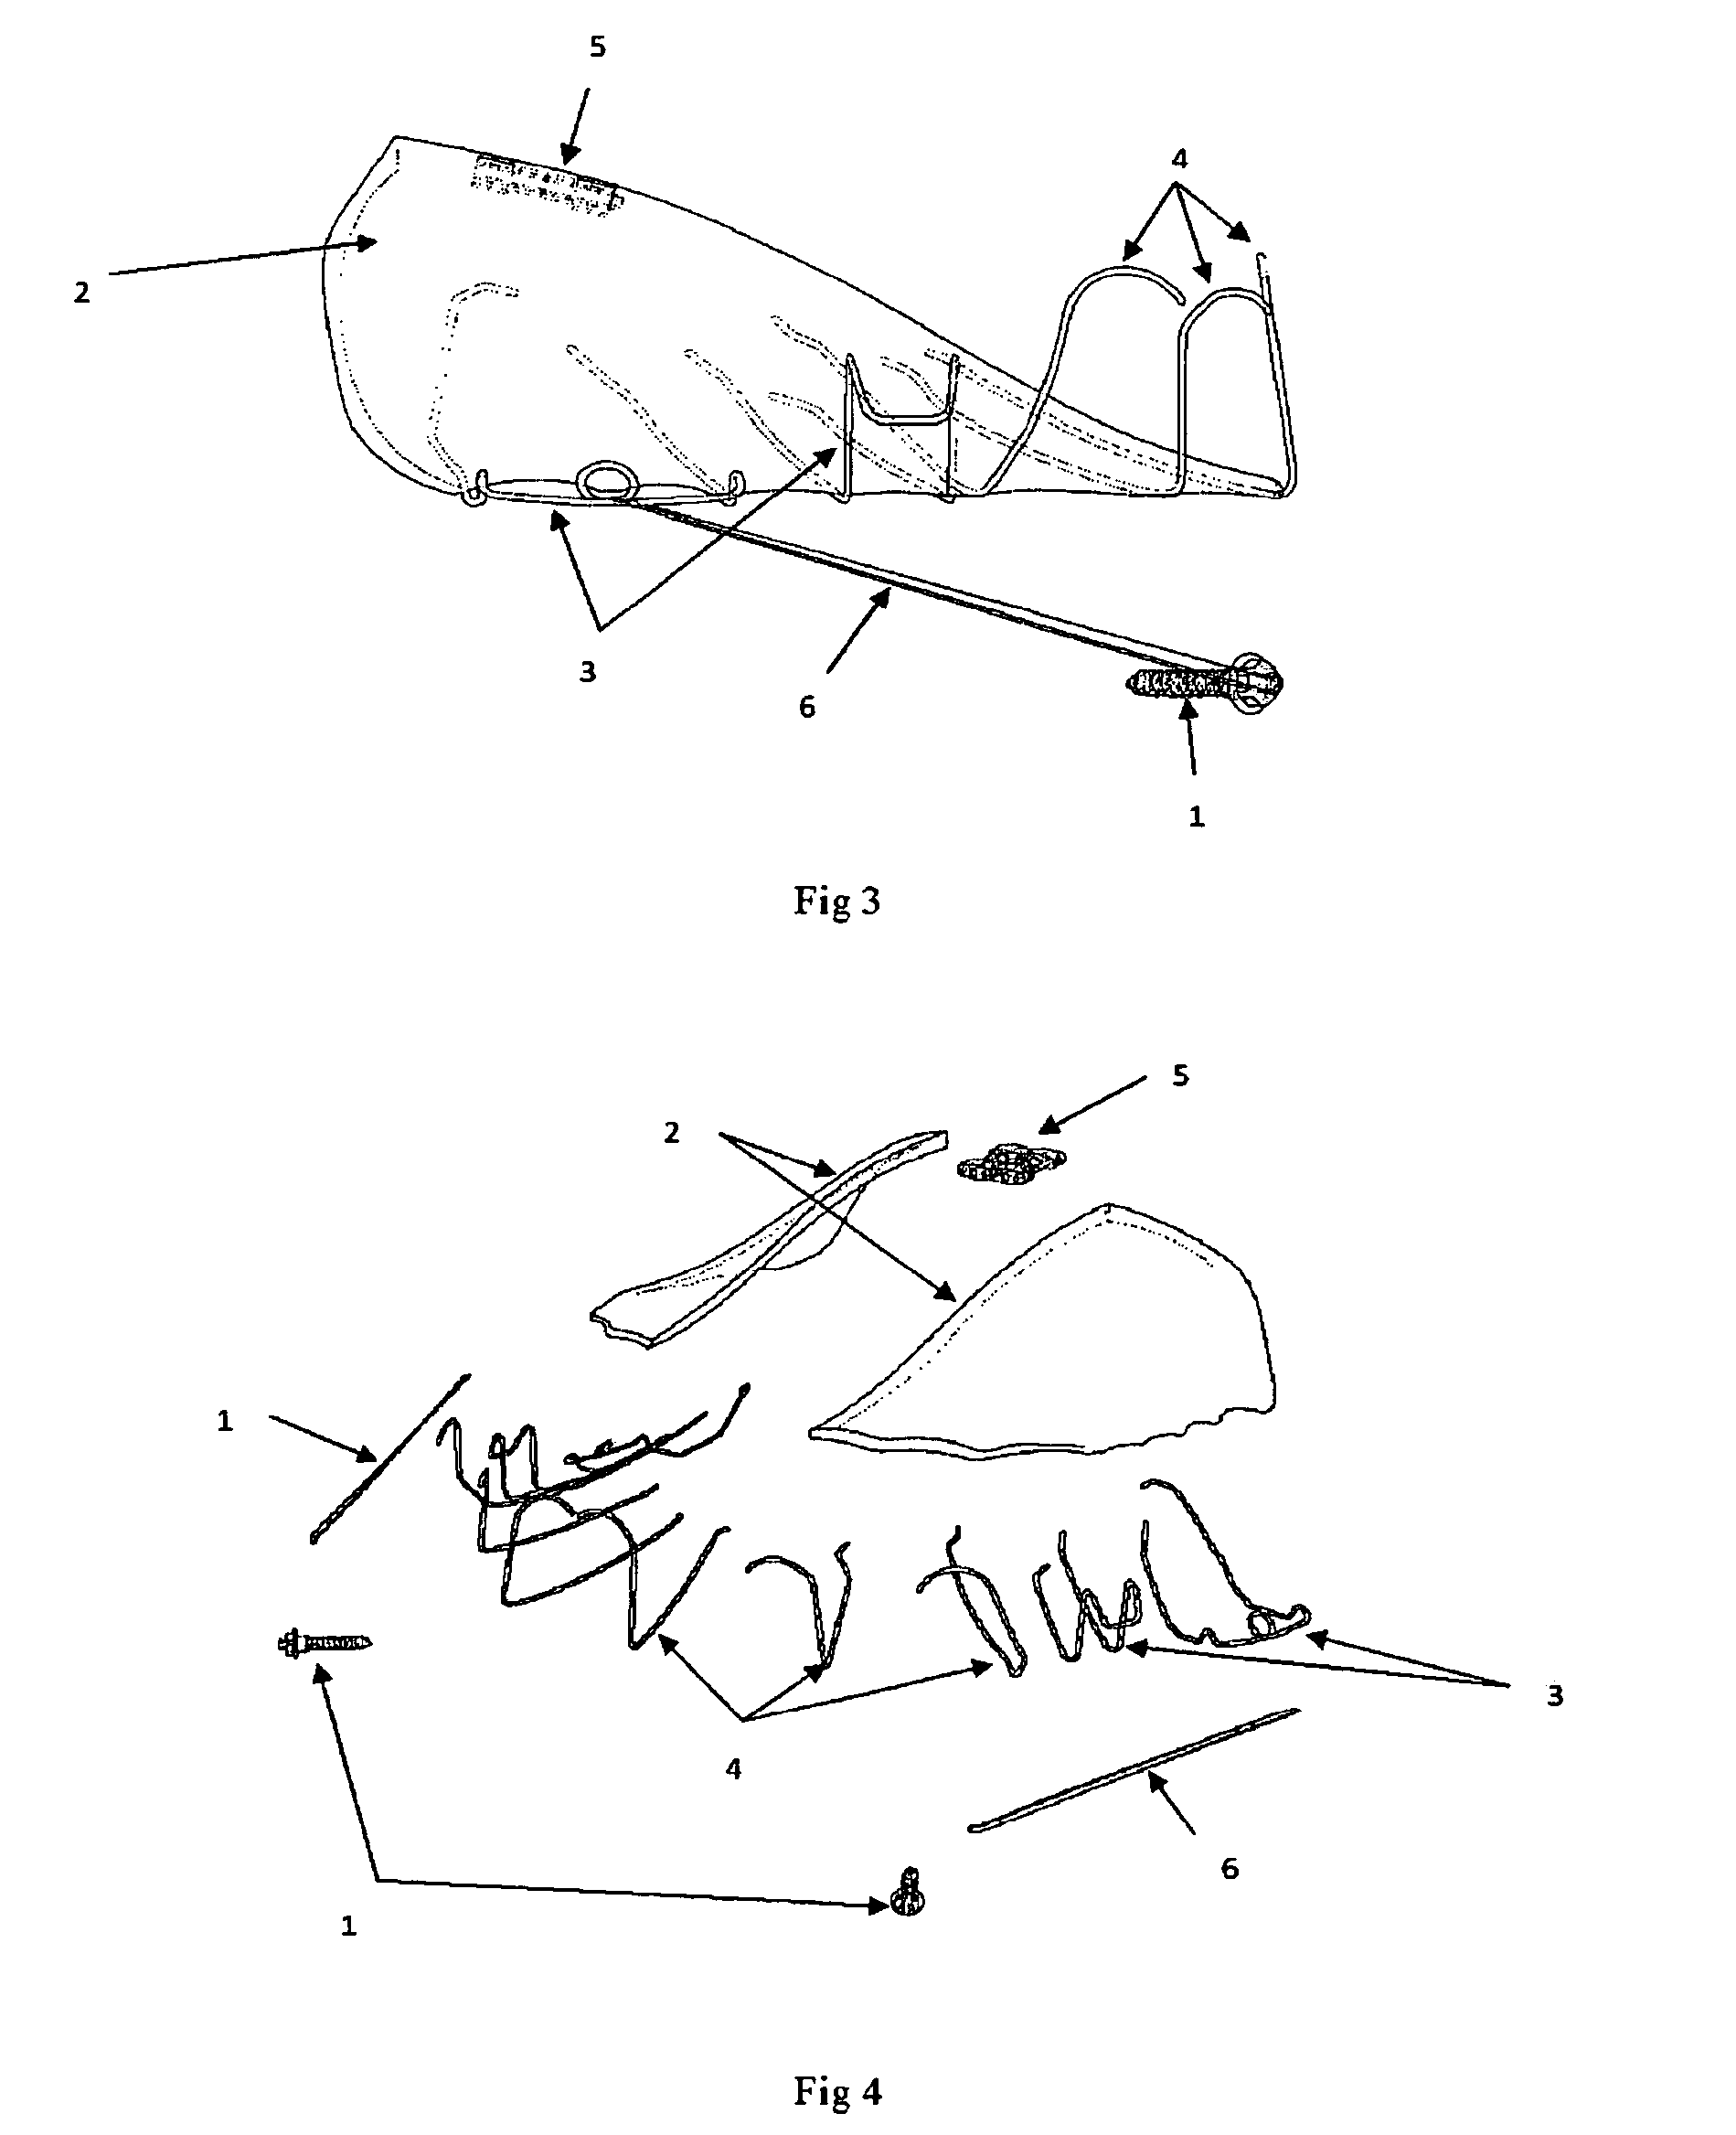 Method and system for treatment of maxillary deficiency using miniscrews